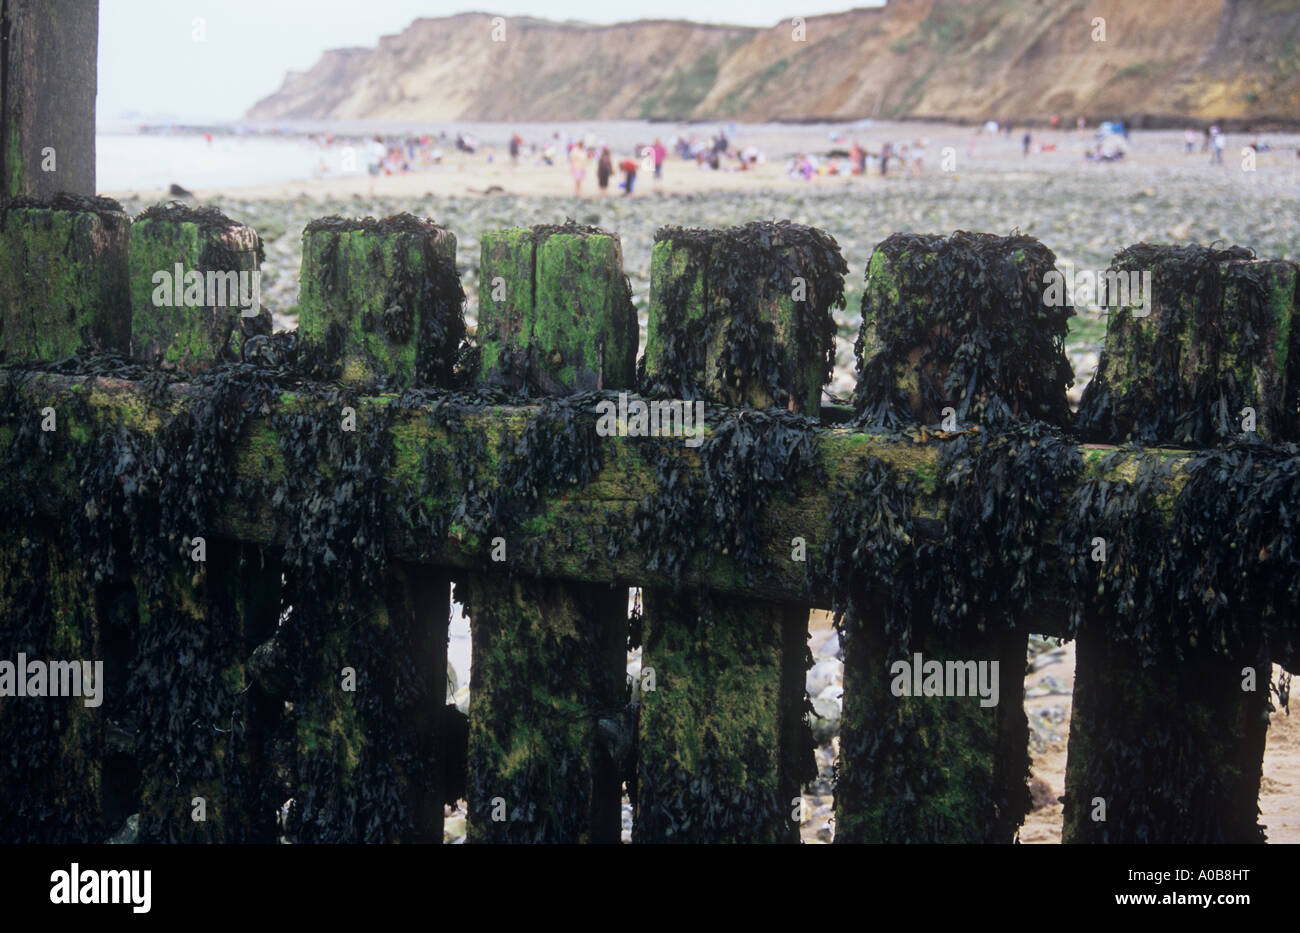 Close up of seaside groyne encrusted with brown Bladder wrack seaweed or Fucus vesiculosus with people beach and cliffs behind Stock Photo